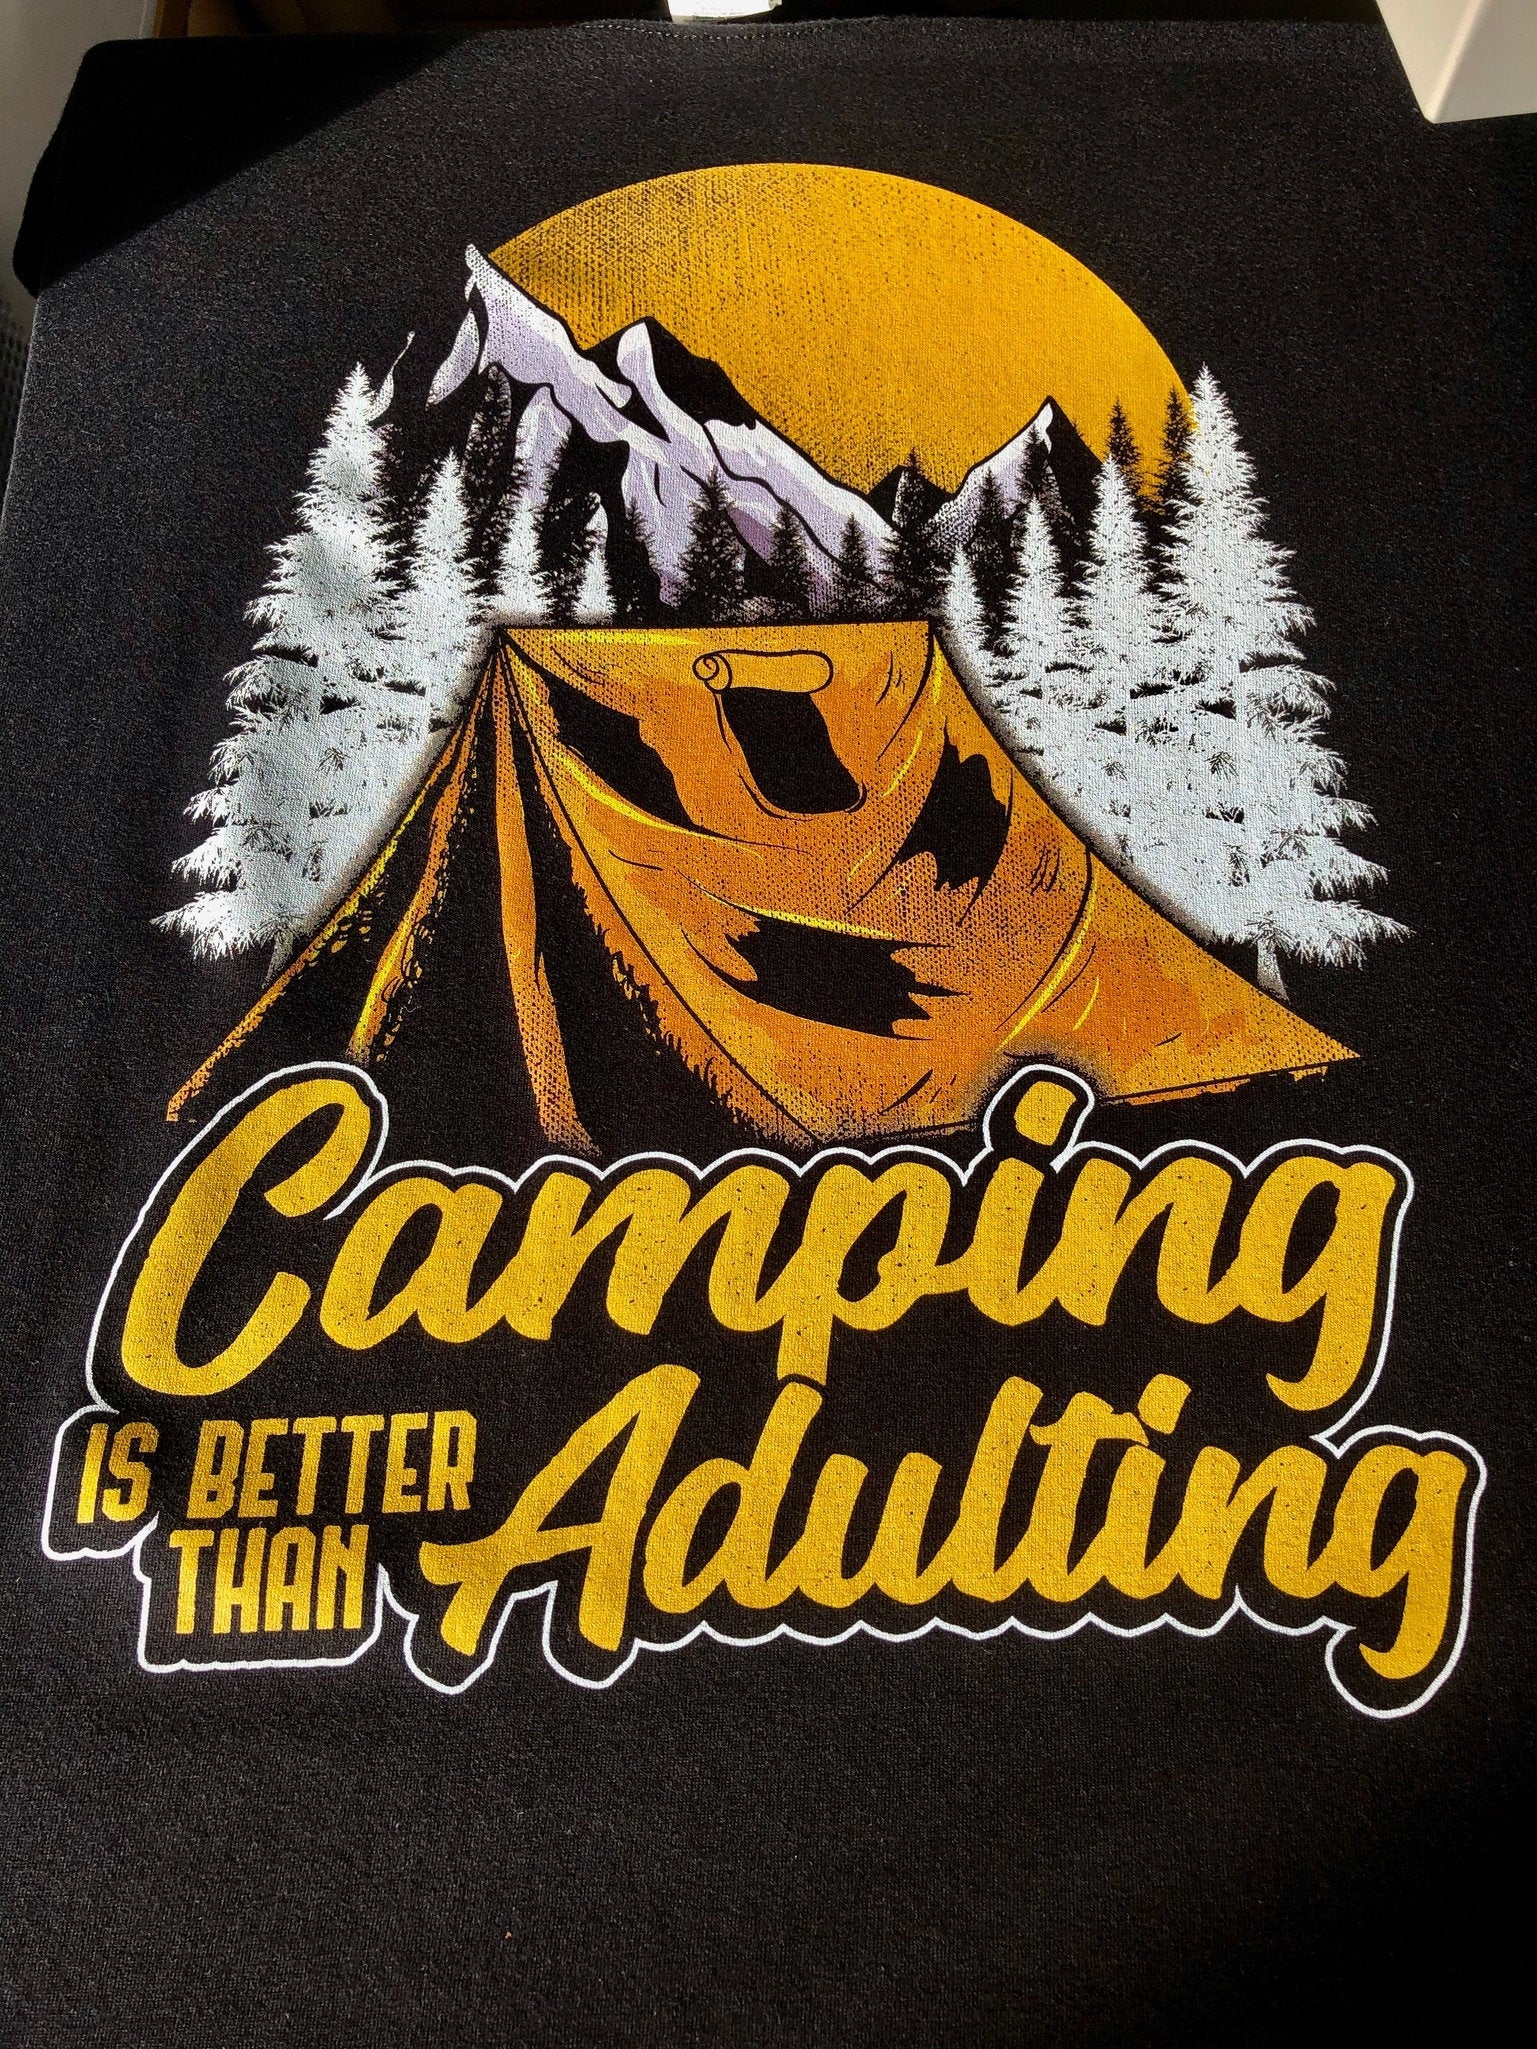 Funny Camping Shirt, Camping Is Better Than Adulting Gift Idea, Humorous Outdoor Adventure T-Shirt